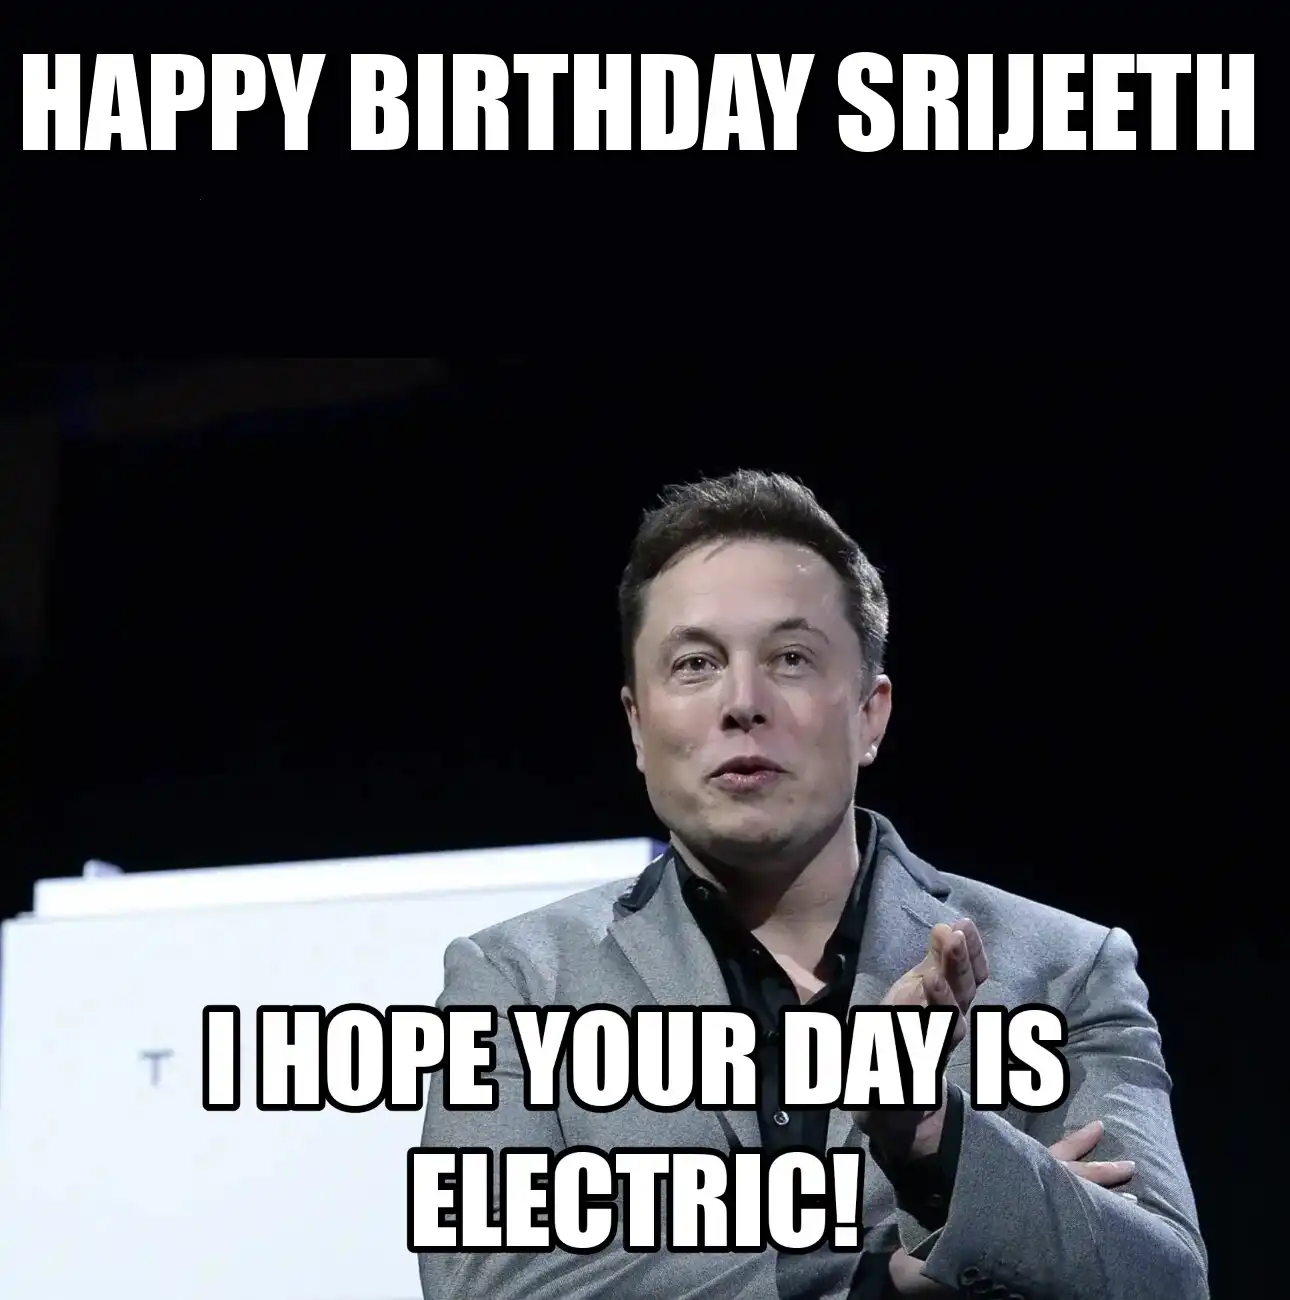 Happy Birthday Srijeeth I Hope Your Day Is Electric Meme